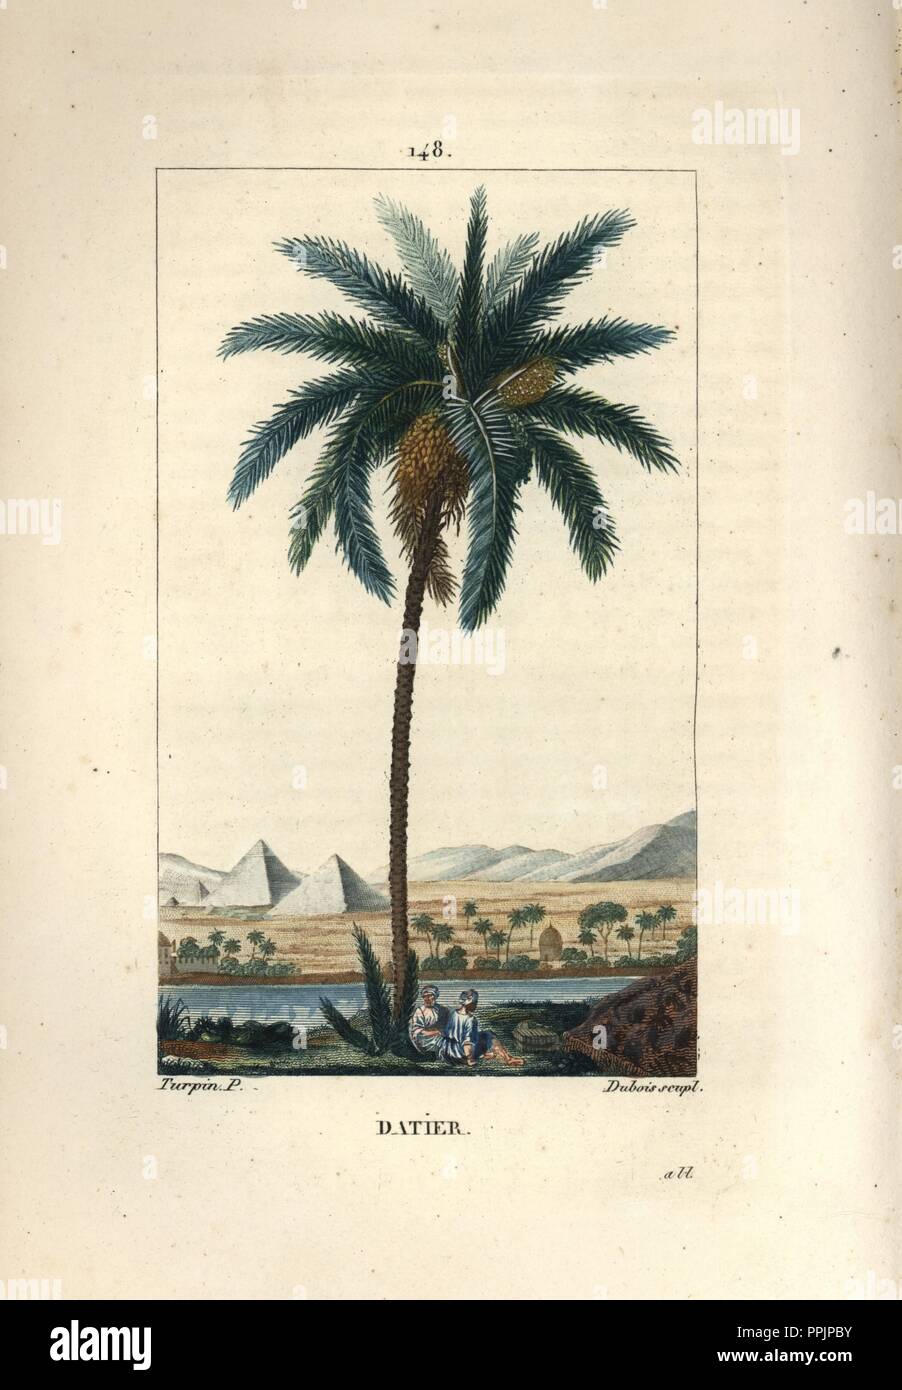 Date palm, Phoenix dactylifera, showing fruit and leaves against landscape with pyramids and river. Handcoloured stipple copperplate engraving by Dubois from a drawing by Pierre Jean-Francois Turpin from Chaumeton, Poiret et Chamberet's 'La Flore Medicale,' Paris, Panckoucke, 1830. Turpin (17751840) was one of the three giants of French botanical art of the era alongside Pierre Joseph Redoute and Pancrace Bessa. Stock Photo